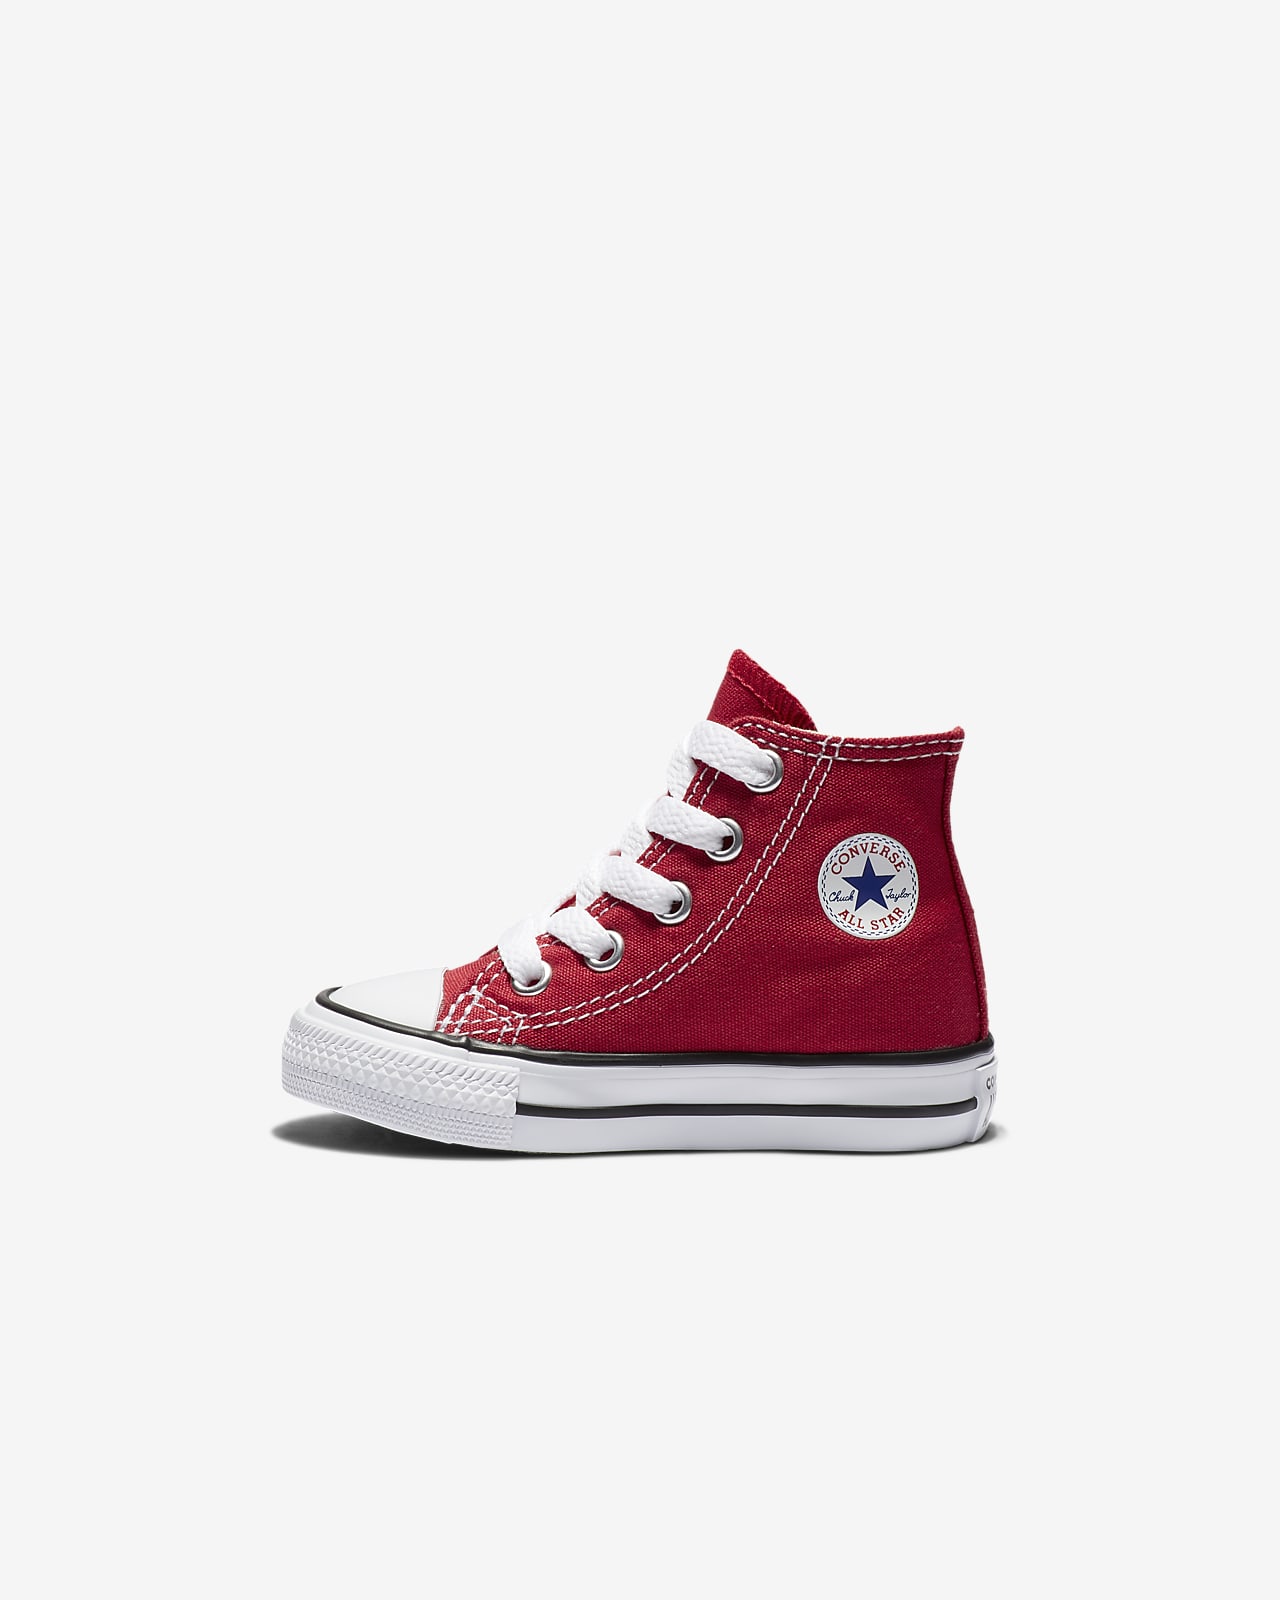 Converse Rojos Niño Top Sellers, UP TO 63% OFF | www.apmusicales.com سم كم قدم